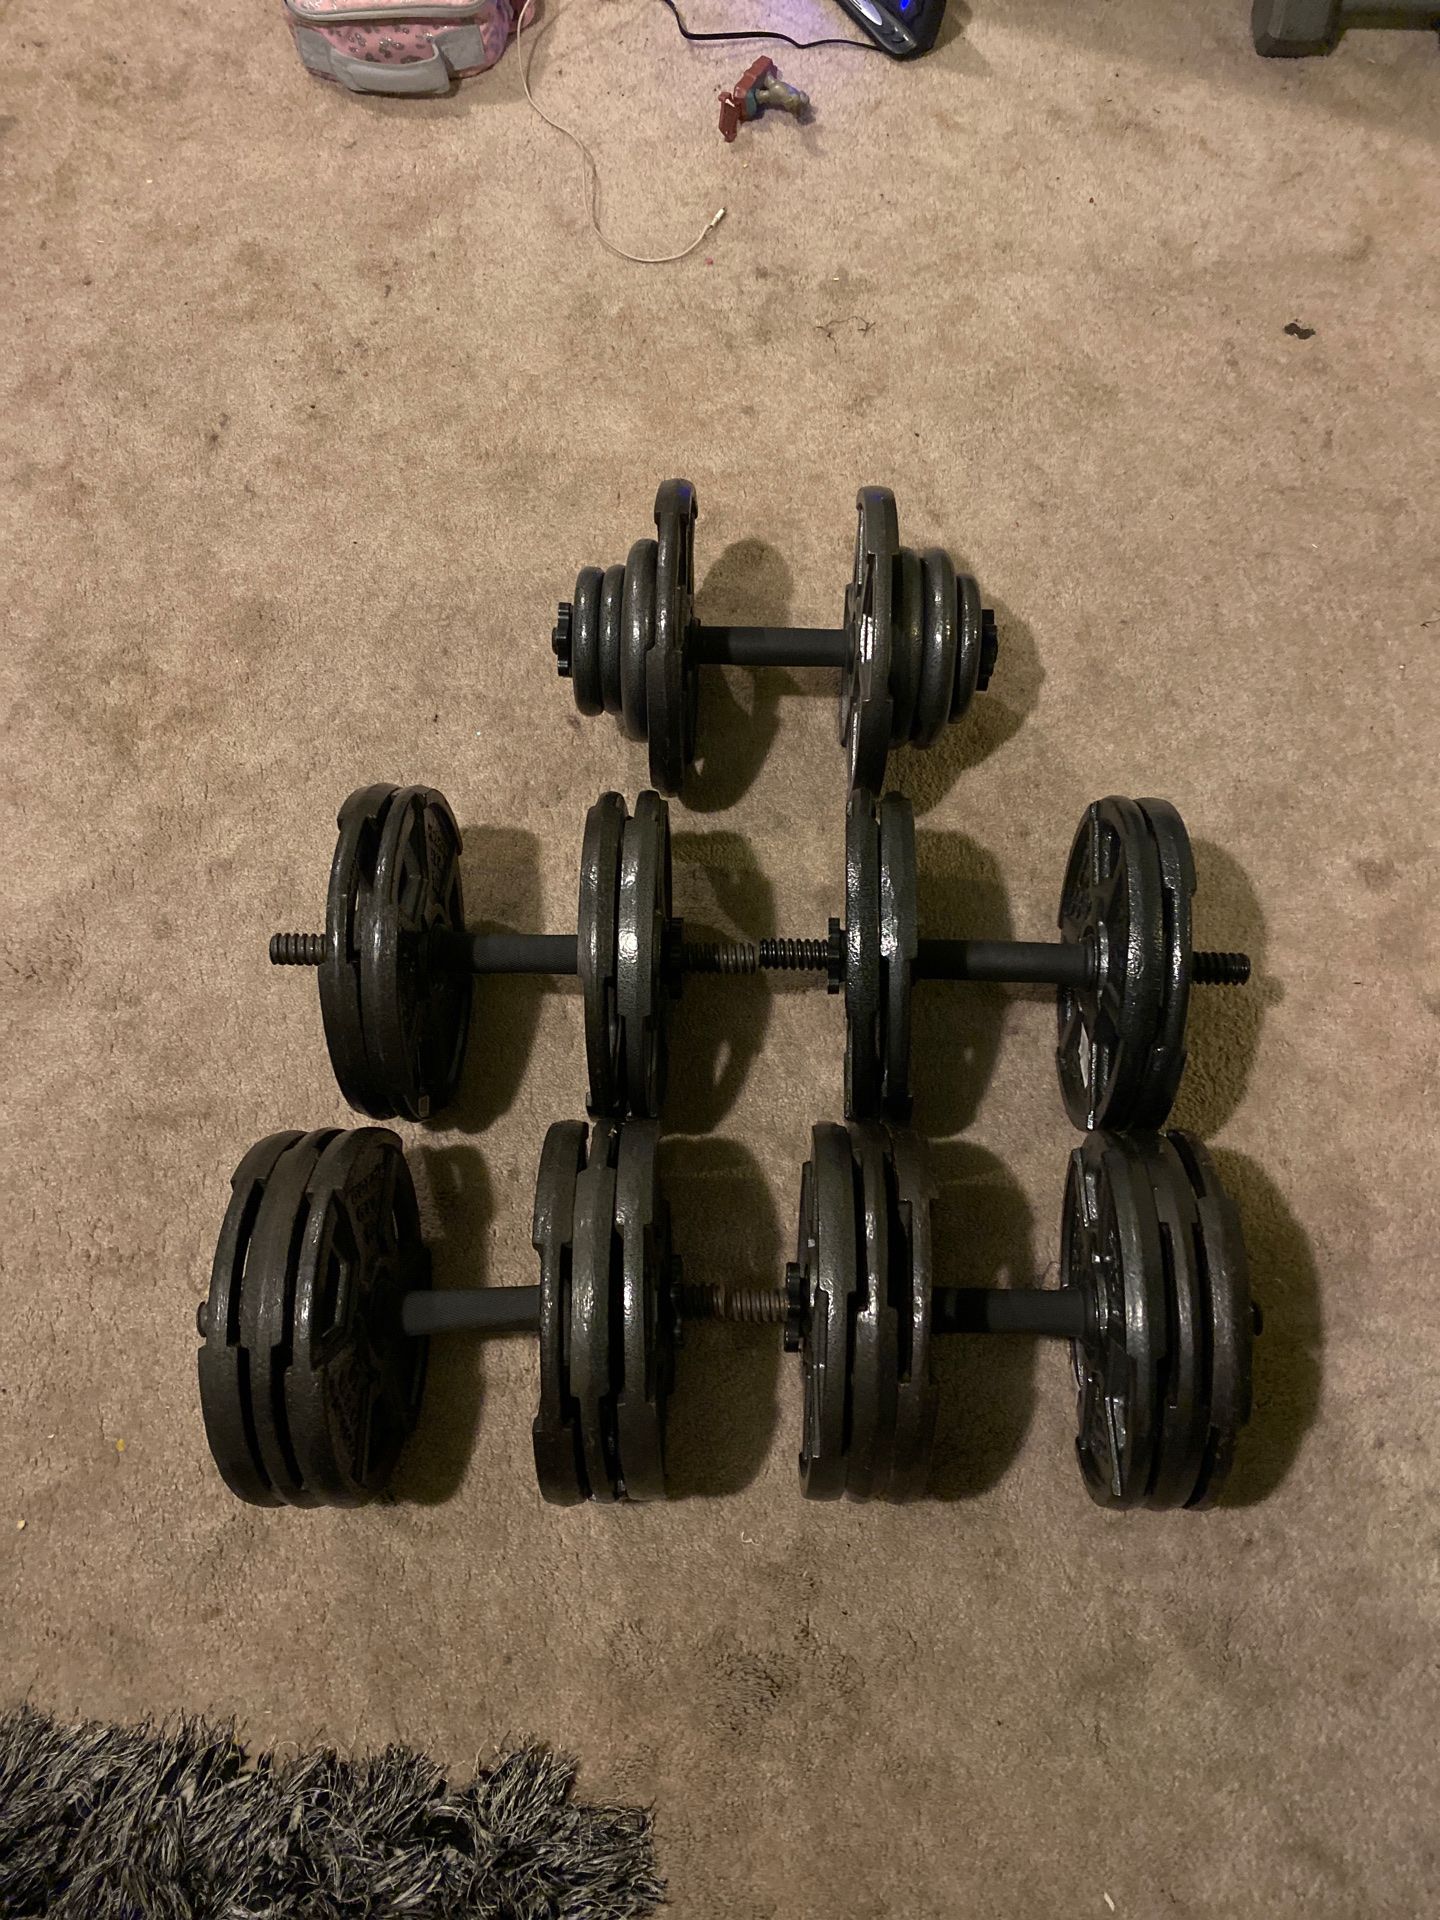 10lbs weight plates. In dumbbells Pair of 60s. Pair of 40s. And single 50.